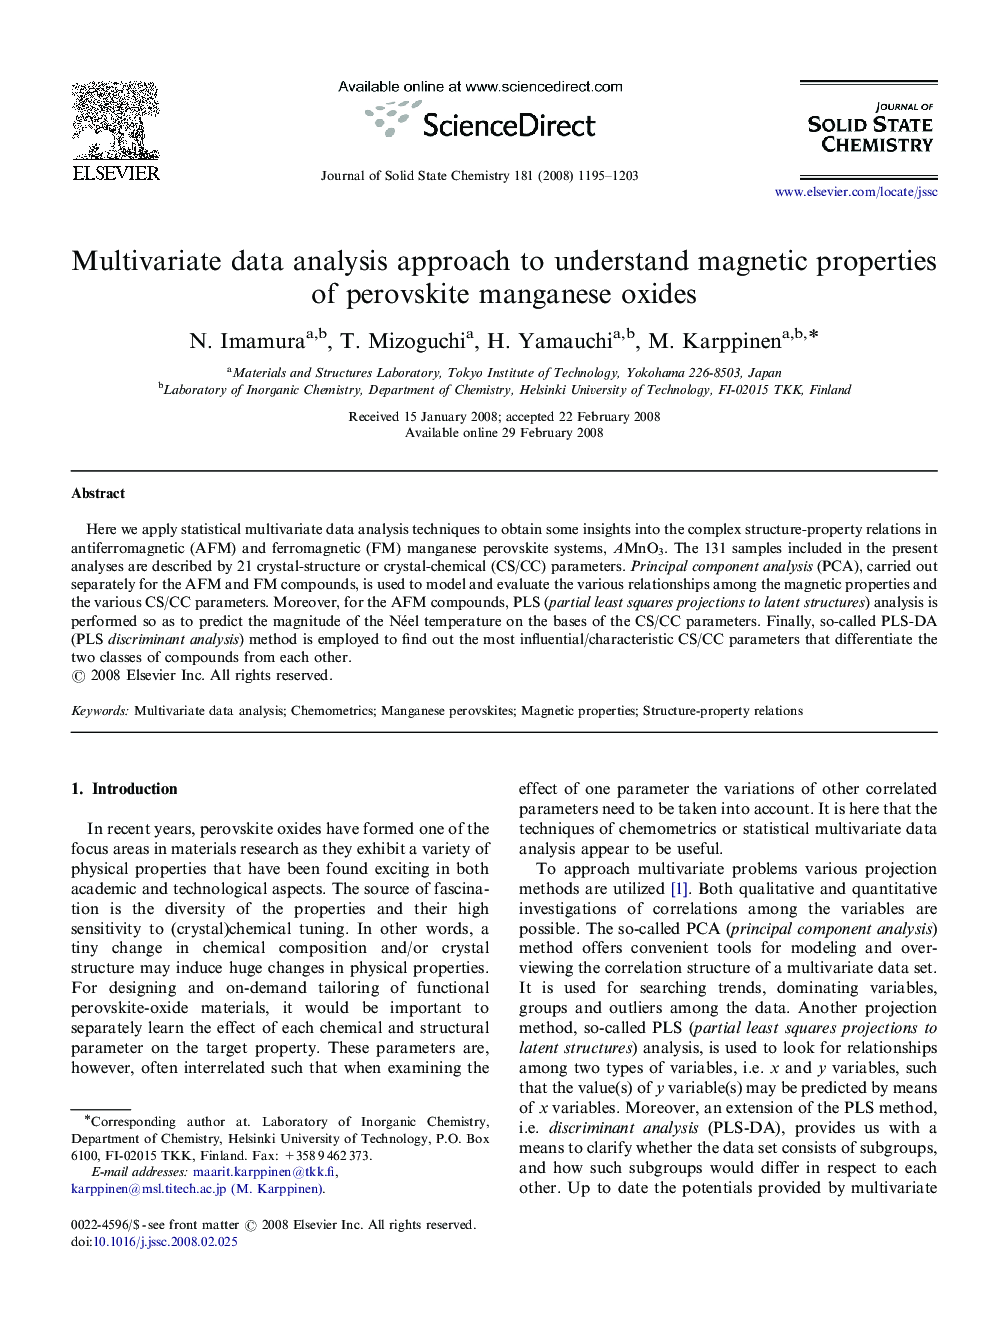 Multivariate data analysis approach to understand magnetic properties of perovskite manganese oxides